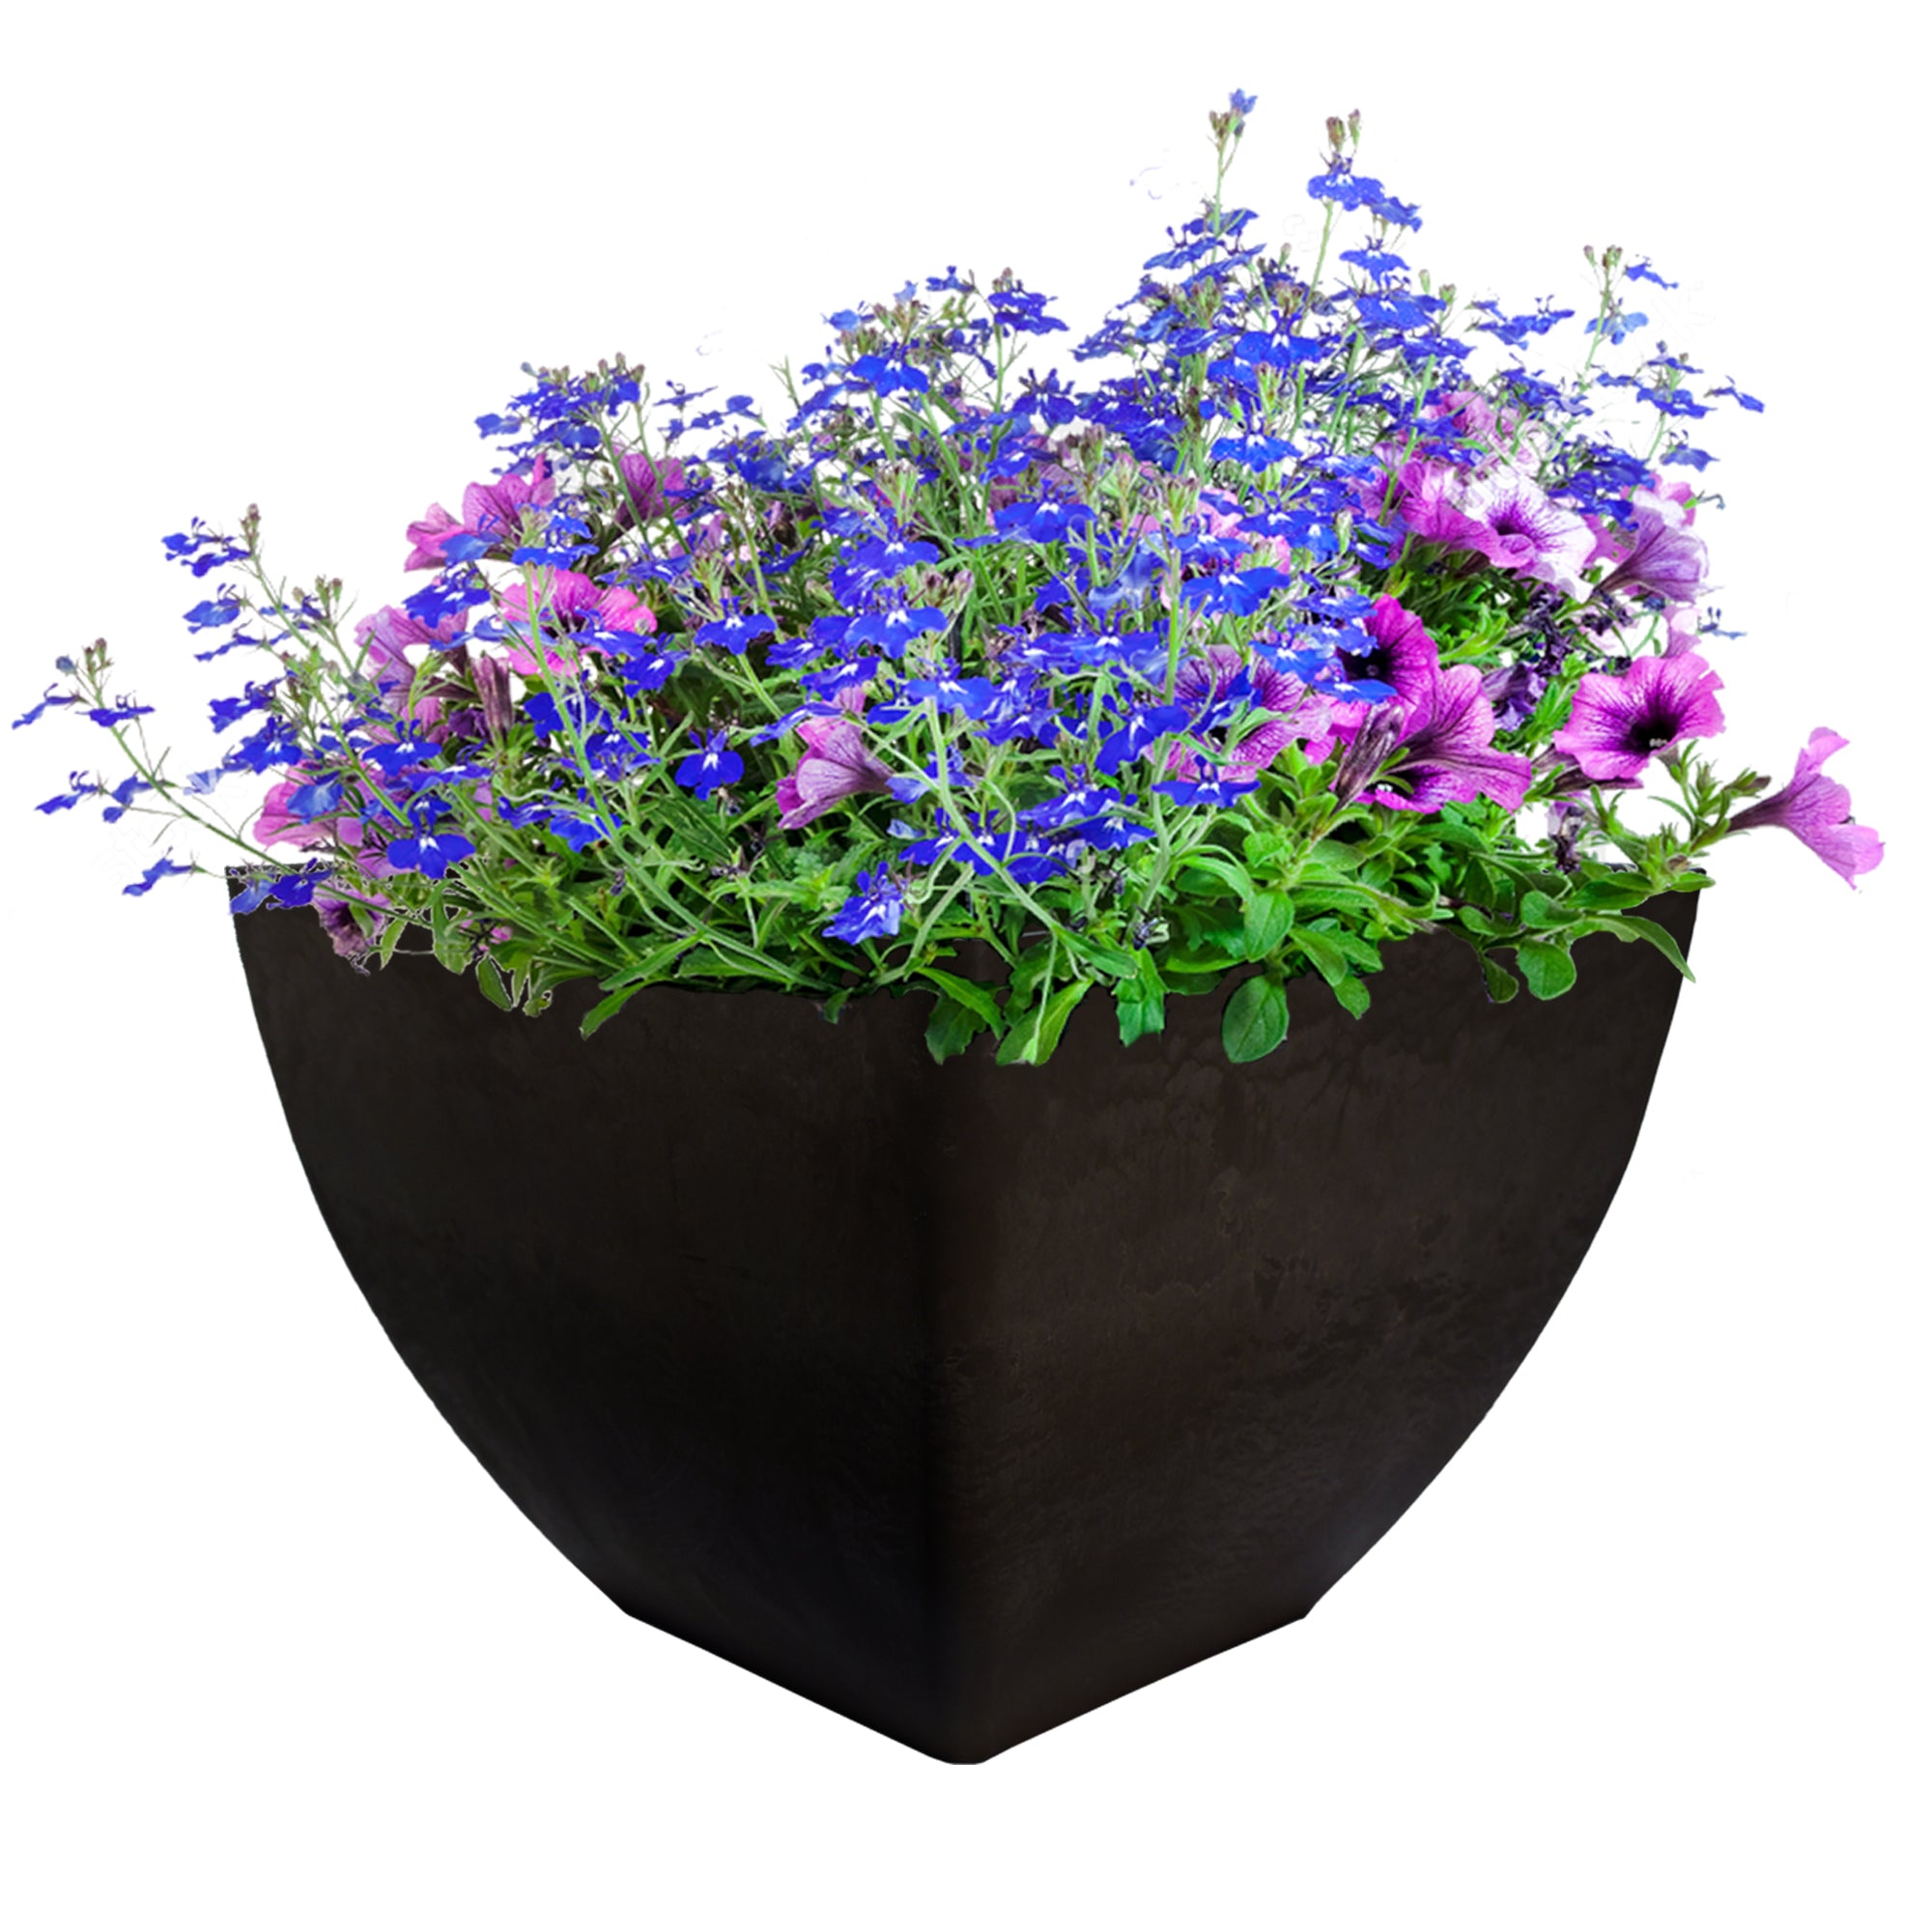 20 inch square planter in graphite with flowers inside on a white background